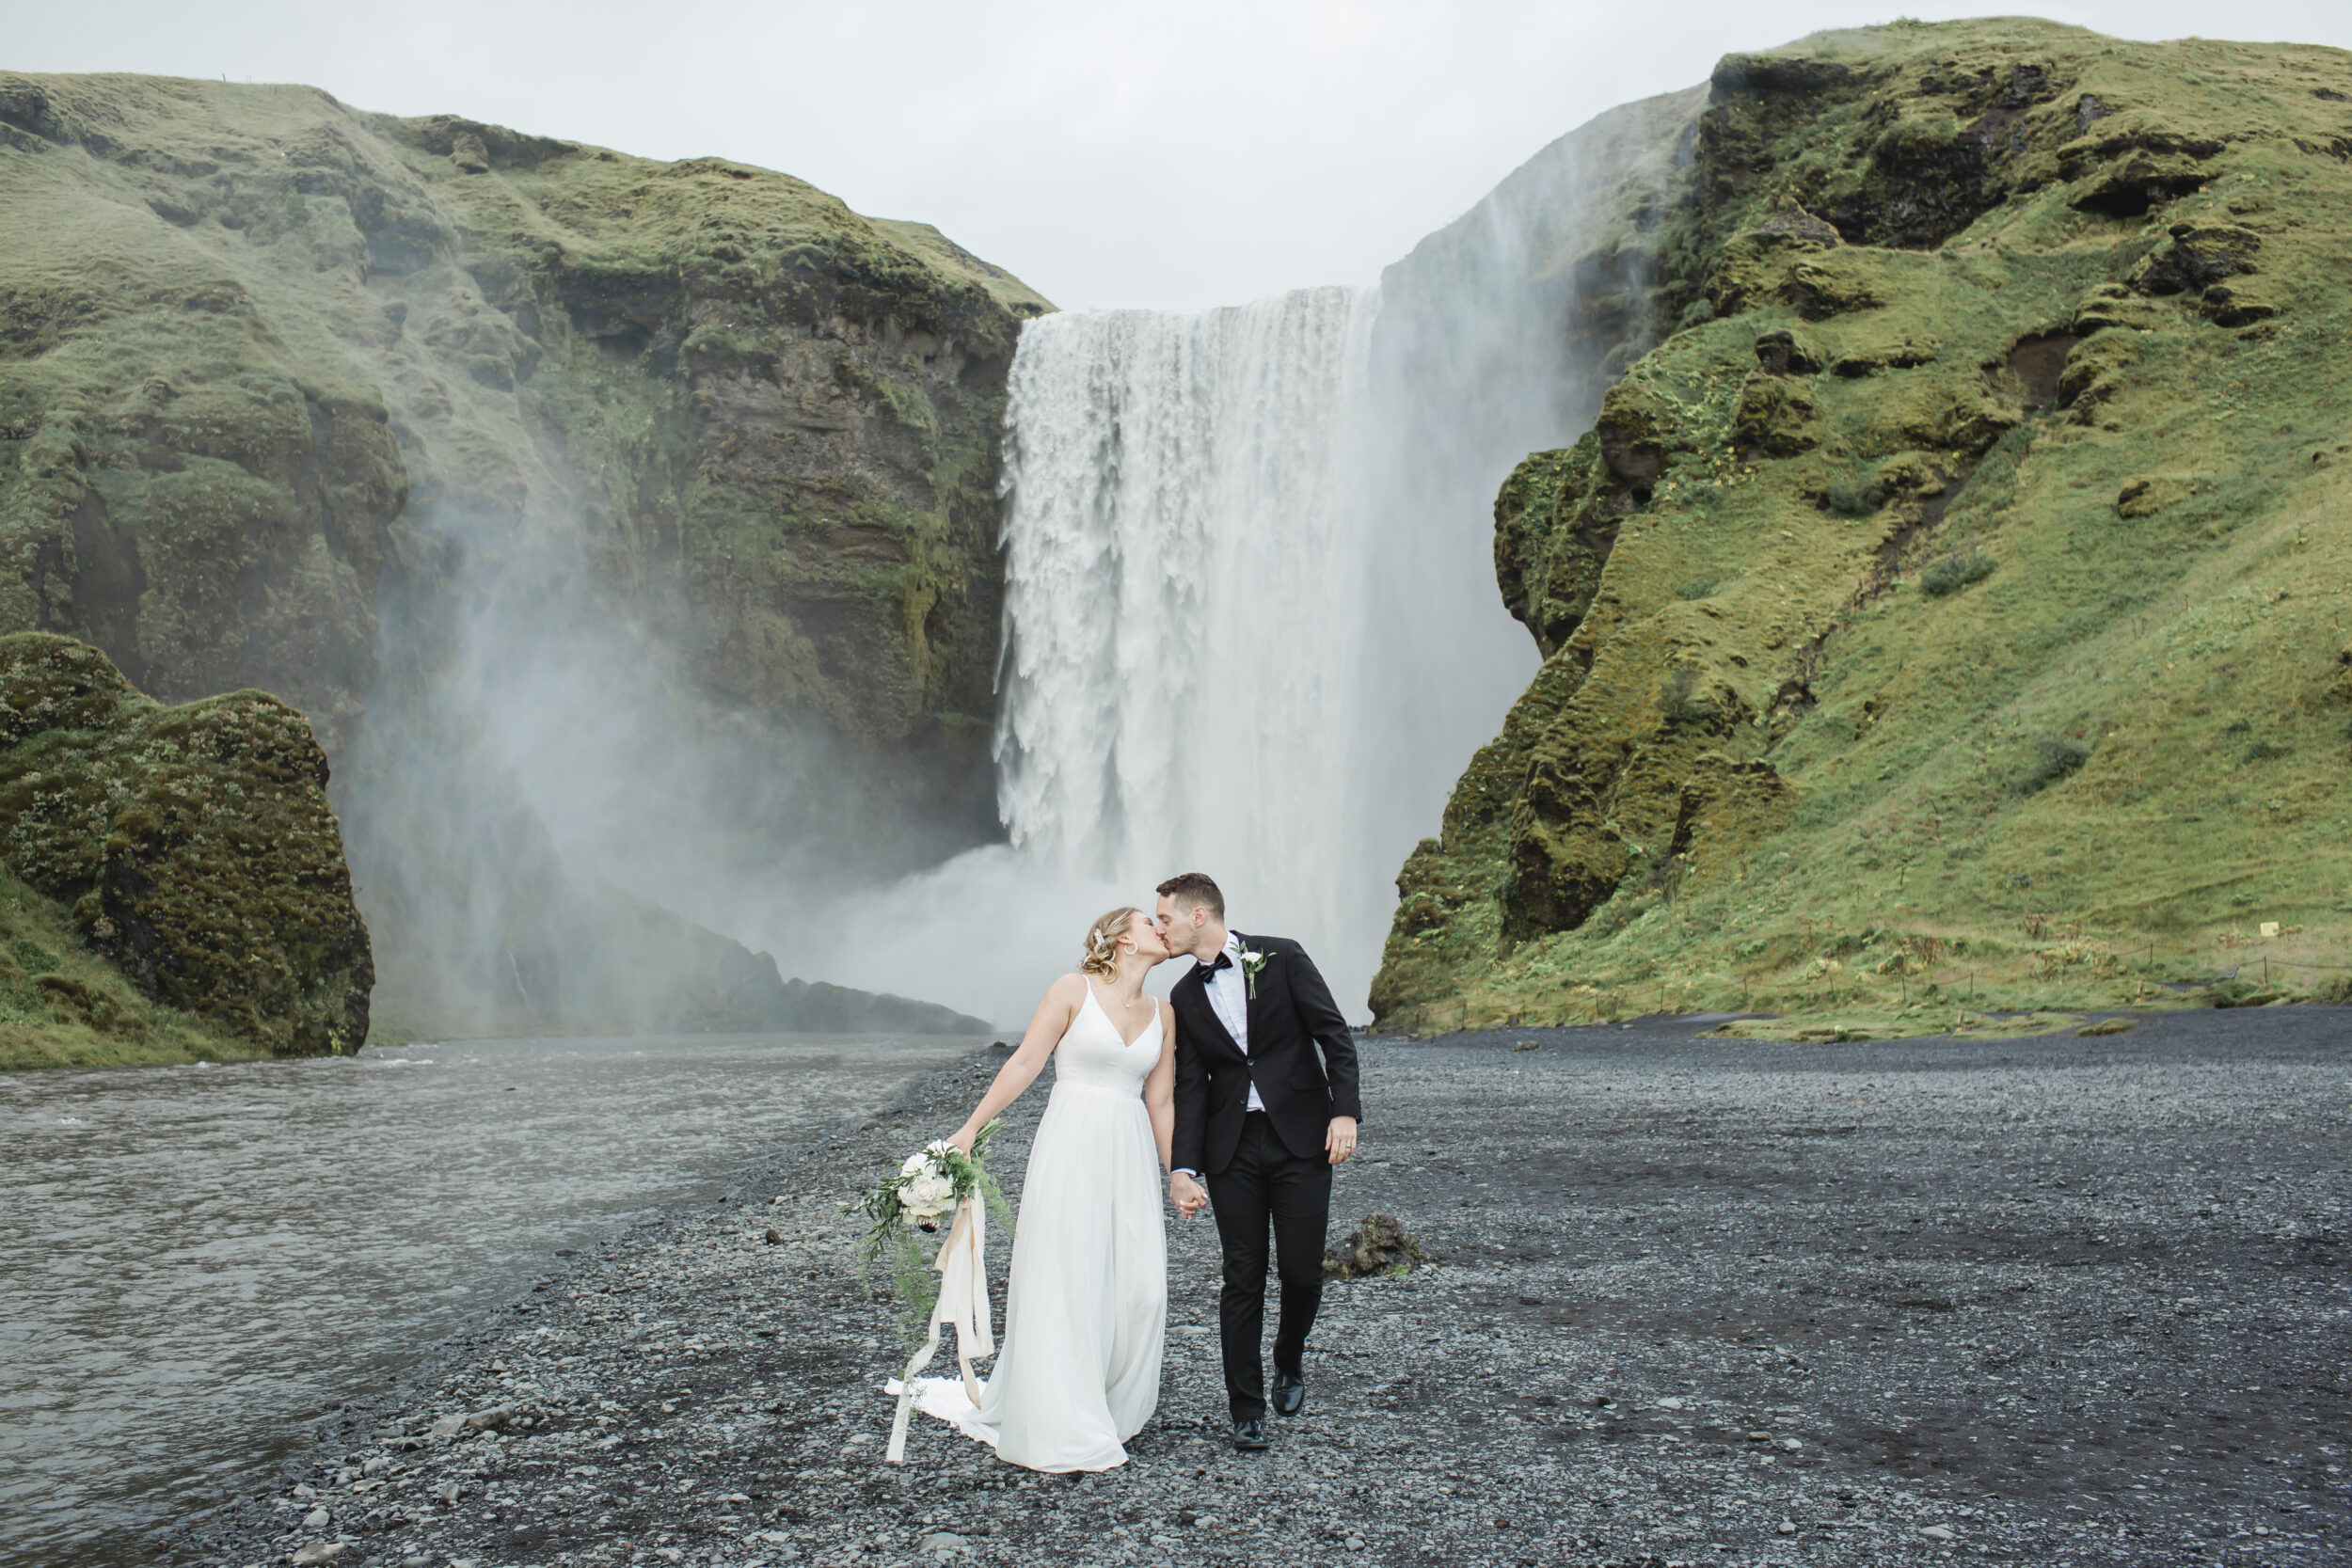 A couple is seen kissing near Skögafoss in wedding attire after their vow ceremony.